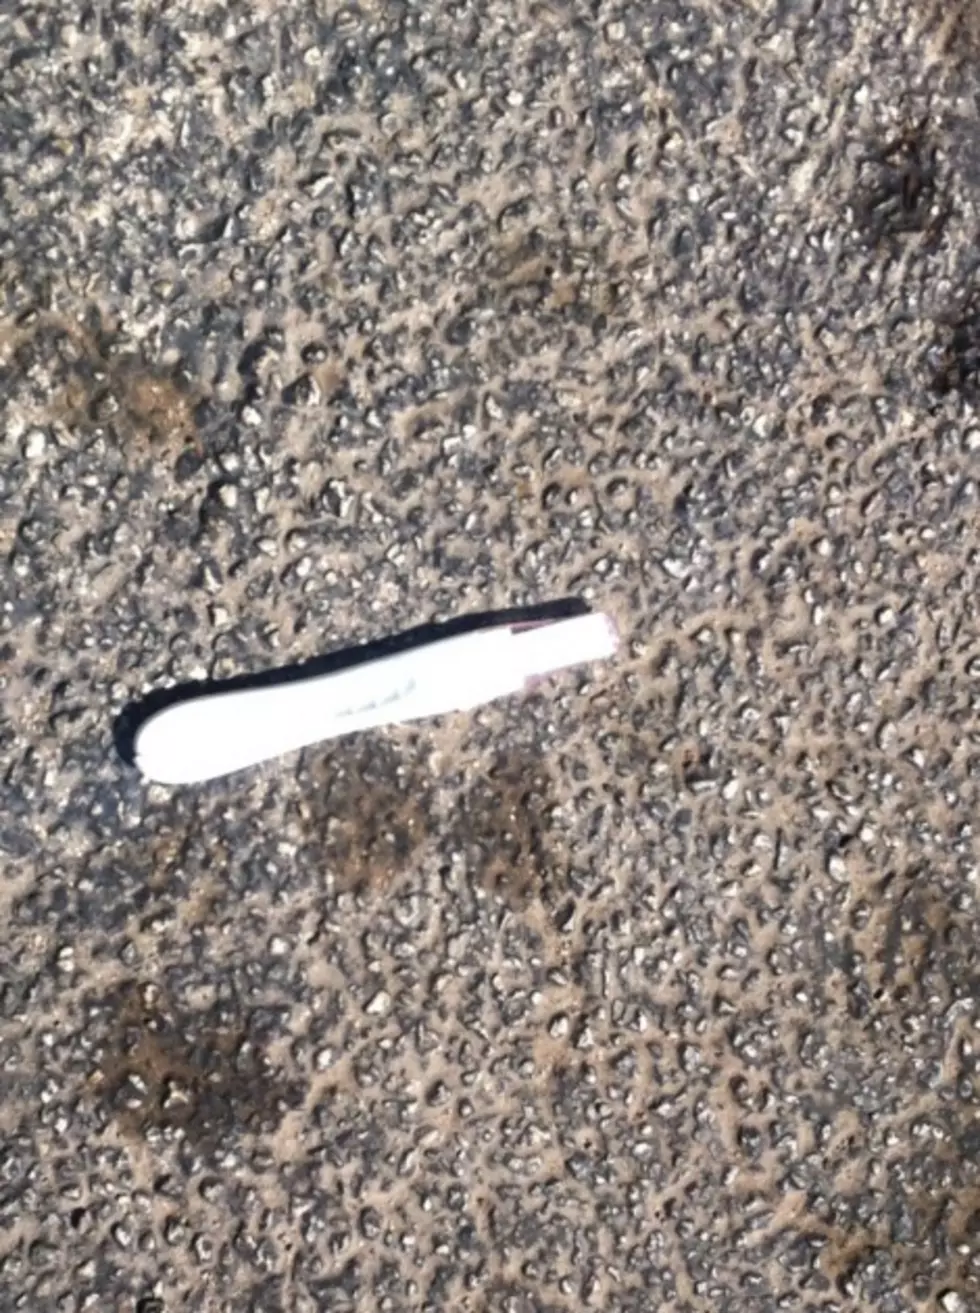 You Have To See What I Saw On The Ground In A Parking Lot